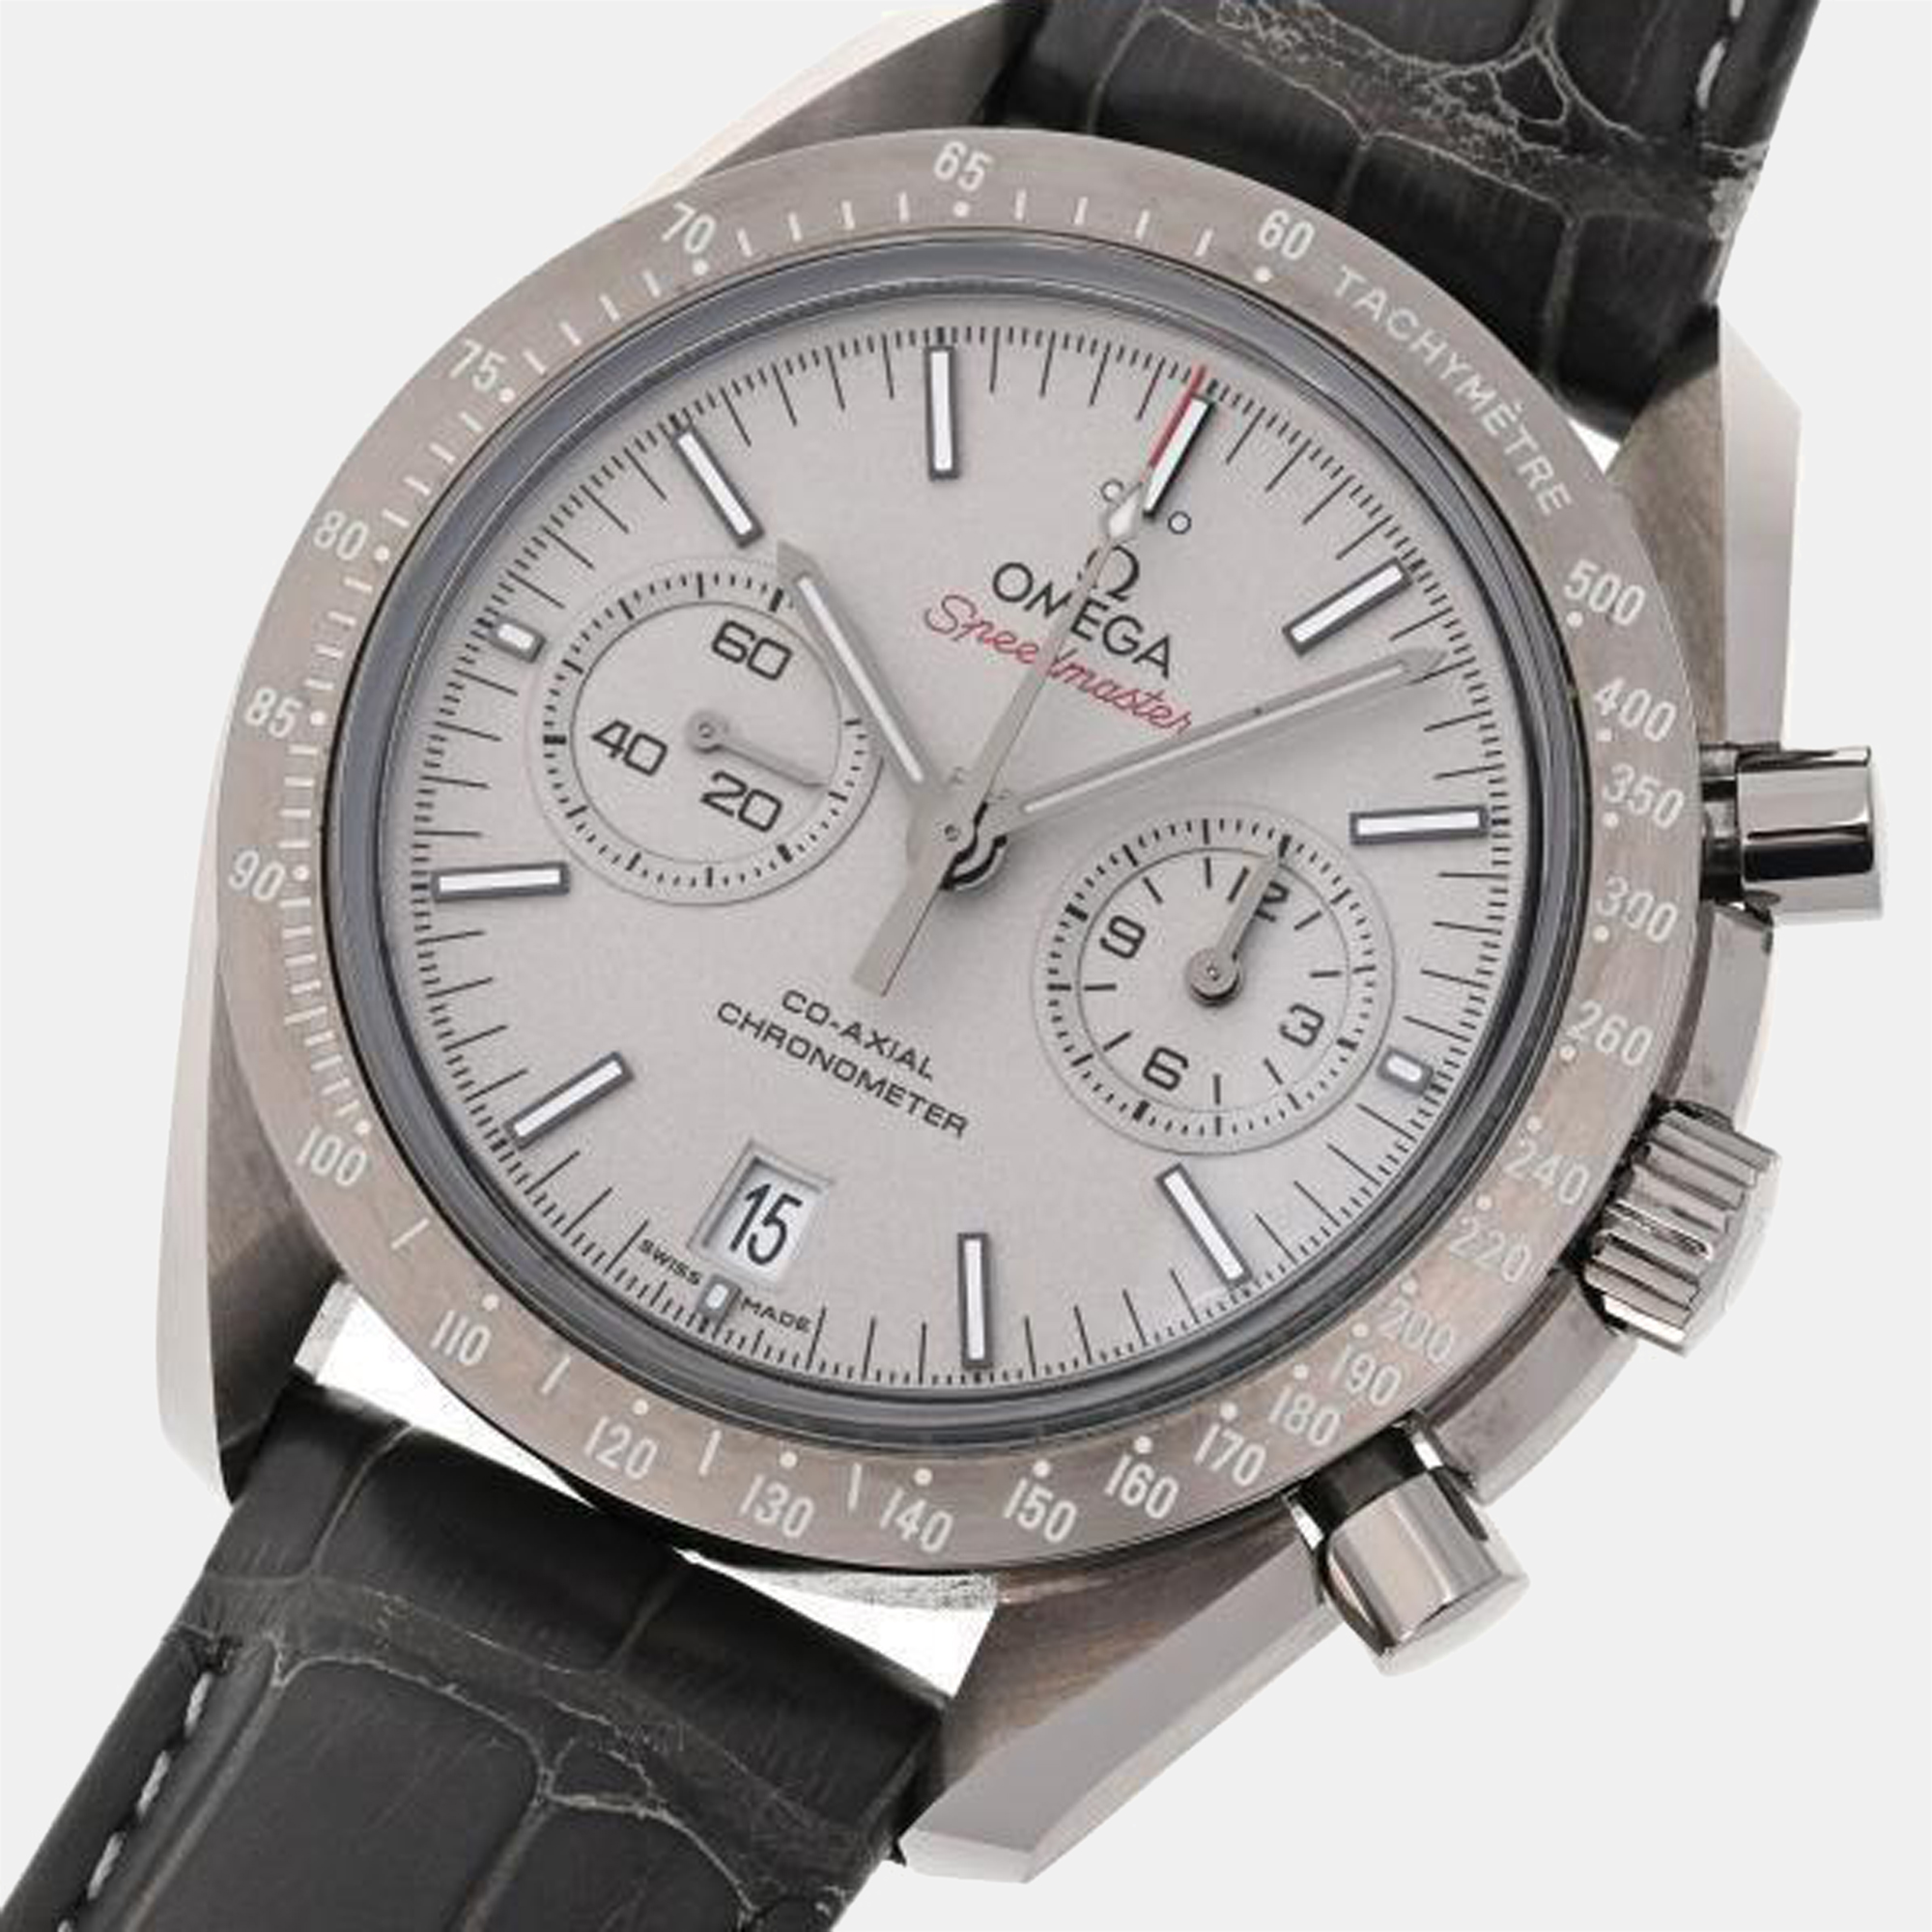 

Omega Grey Stainless Steel Speedmaster Side of the Moon 311.93.44.51.99.001 Automatic Men's Wristwatch 44 mm